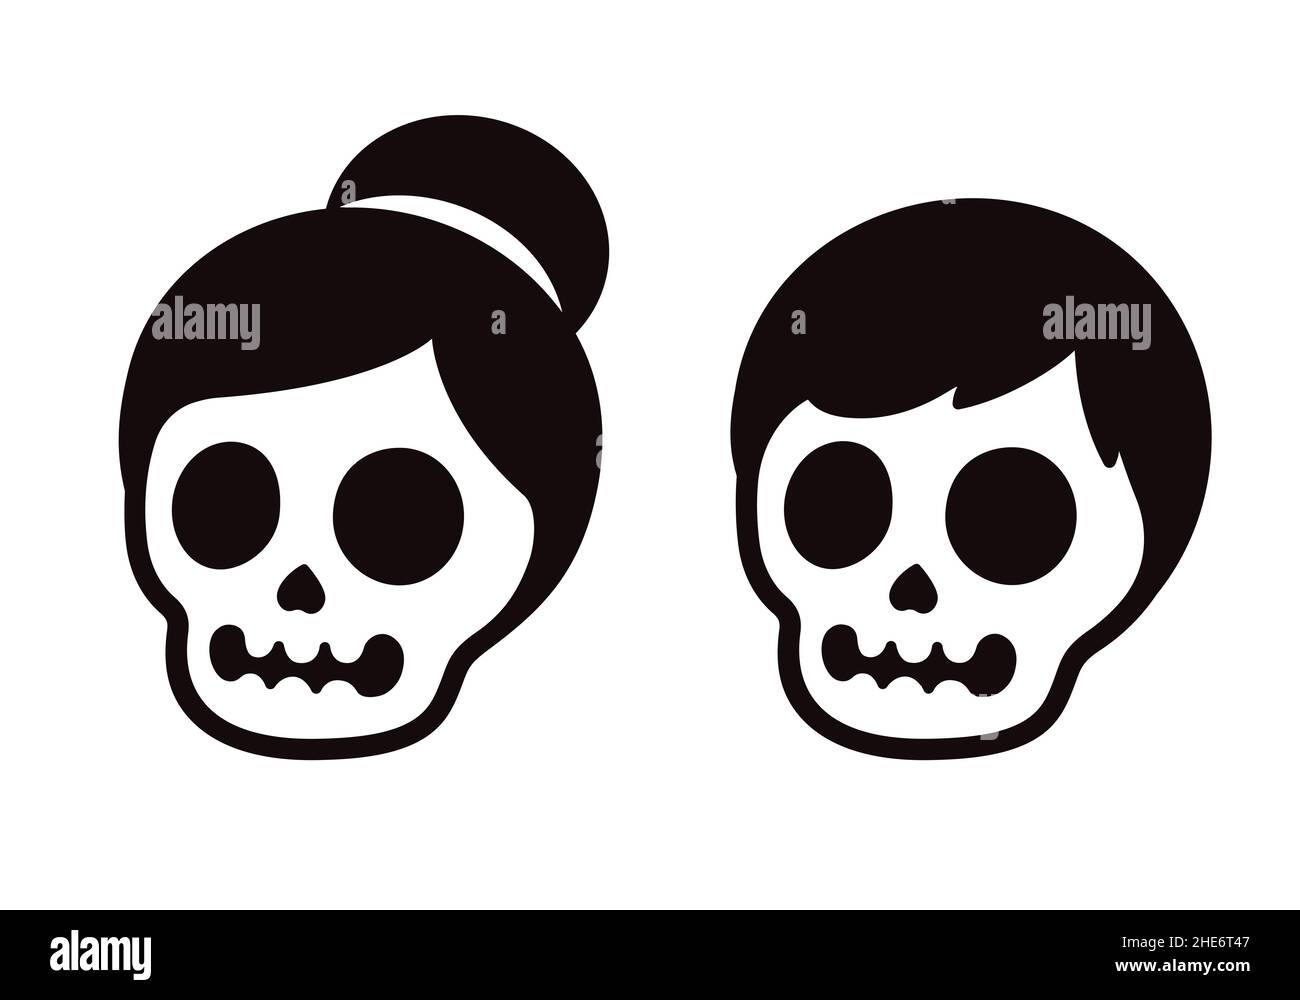 Cartoon skull couple, male and female. Two human skulls with hair. Simple black and white icon or logo, vector clip art illustration. Stock Vector